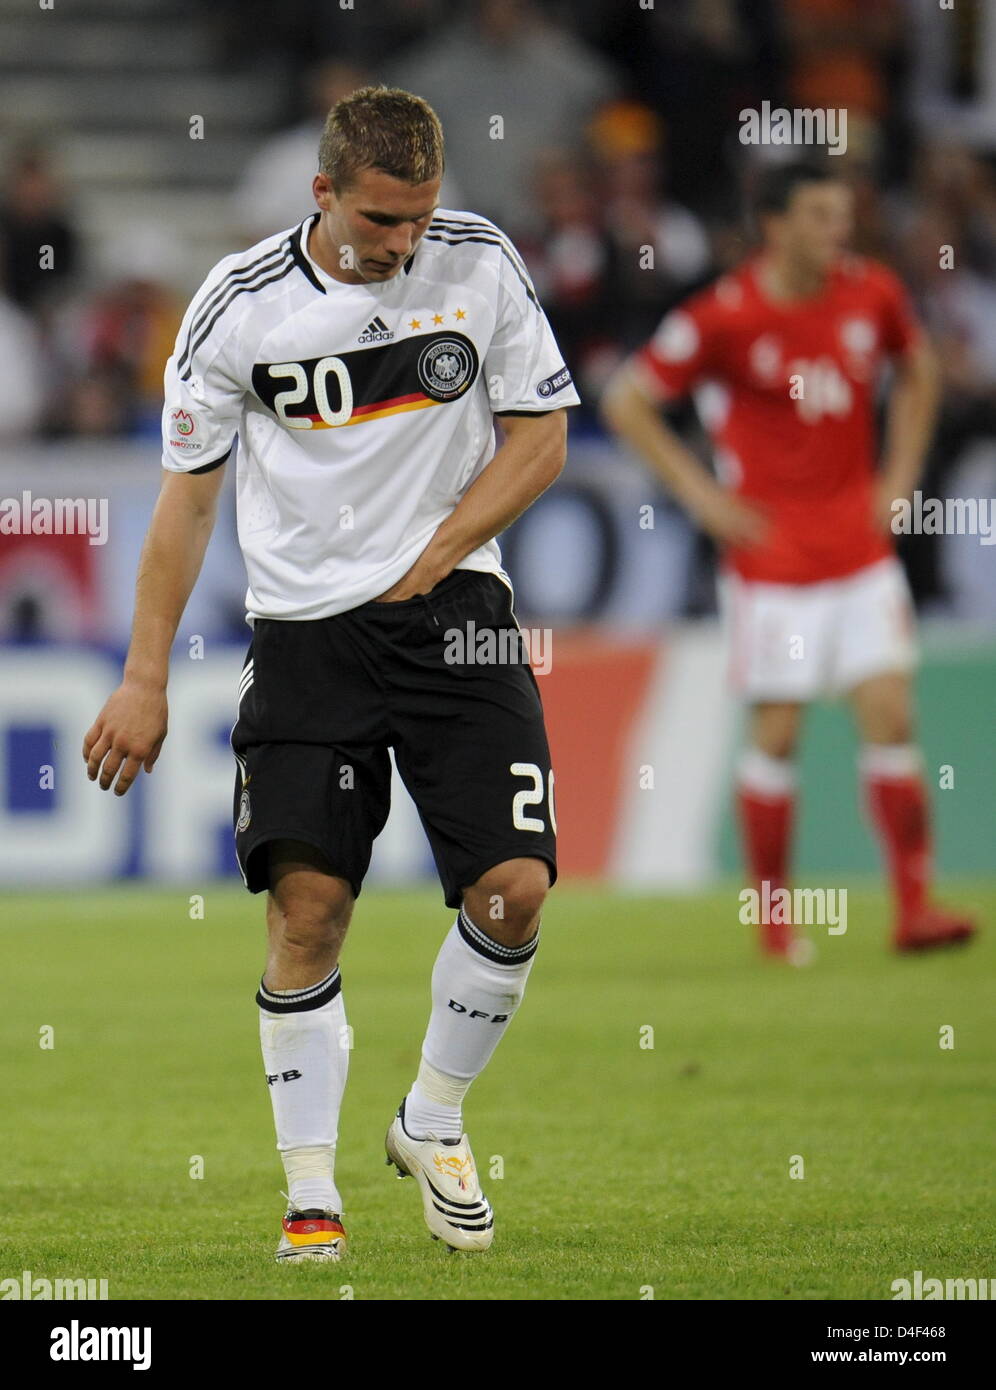 Lukas Podolski of Germany leaves the pitch after he received a kick between his legs by Dariusz Dudka (not pictured) during the EURO 2008 preliminary round group B match in Woerthersee Stadium, Klagenfurt, Austria, 08 June 2008. Photo: Peter Kneffel dpa +please note UEFA restrictions particularly in regard to slide shows and 'No Mobile Services'+ +++###dpa###+++ Stock Photo